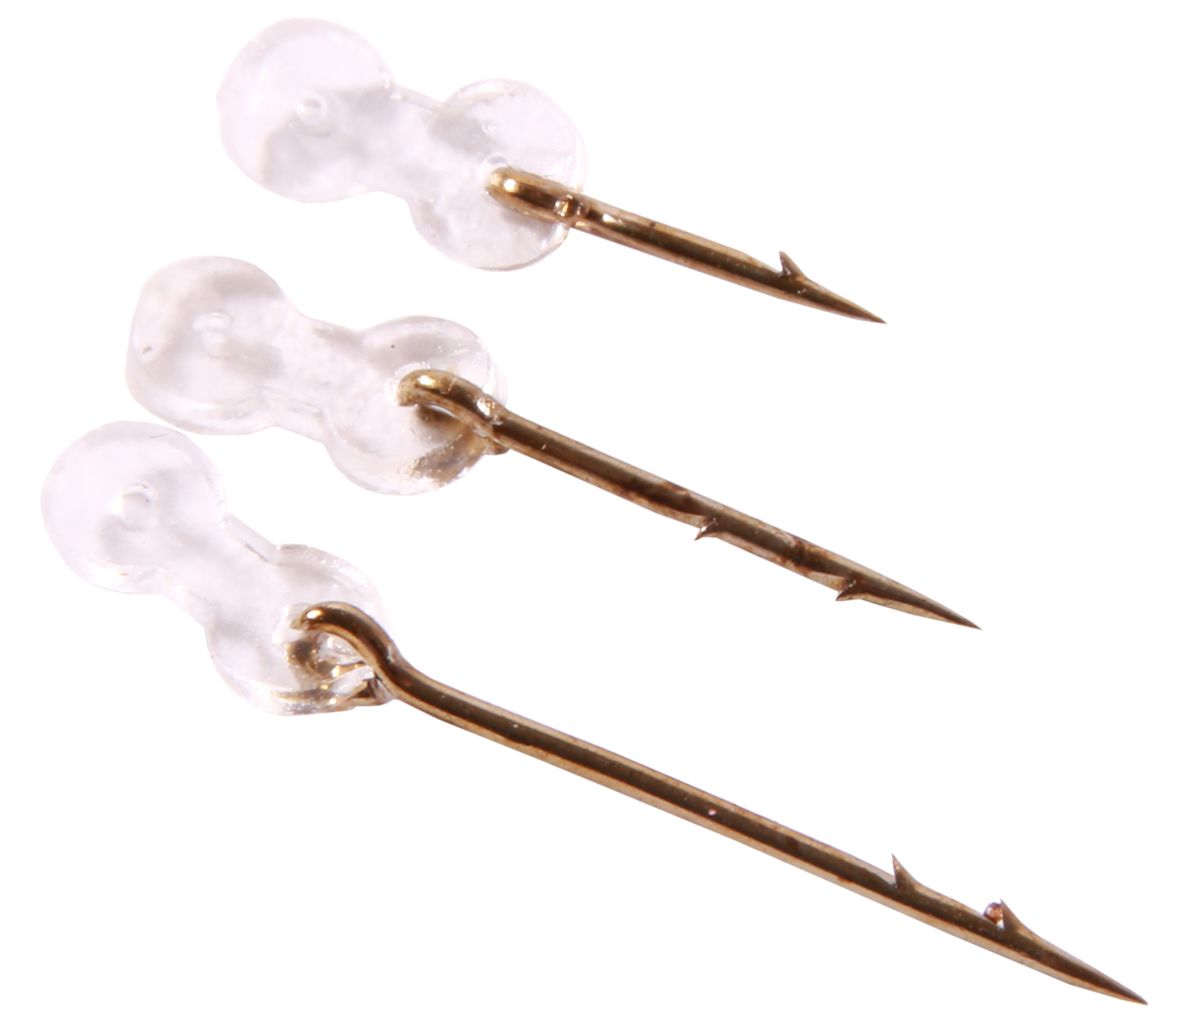 Ultimate Silicon Spike Hairs, 12 pieces